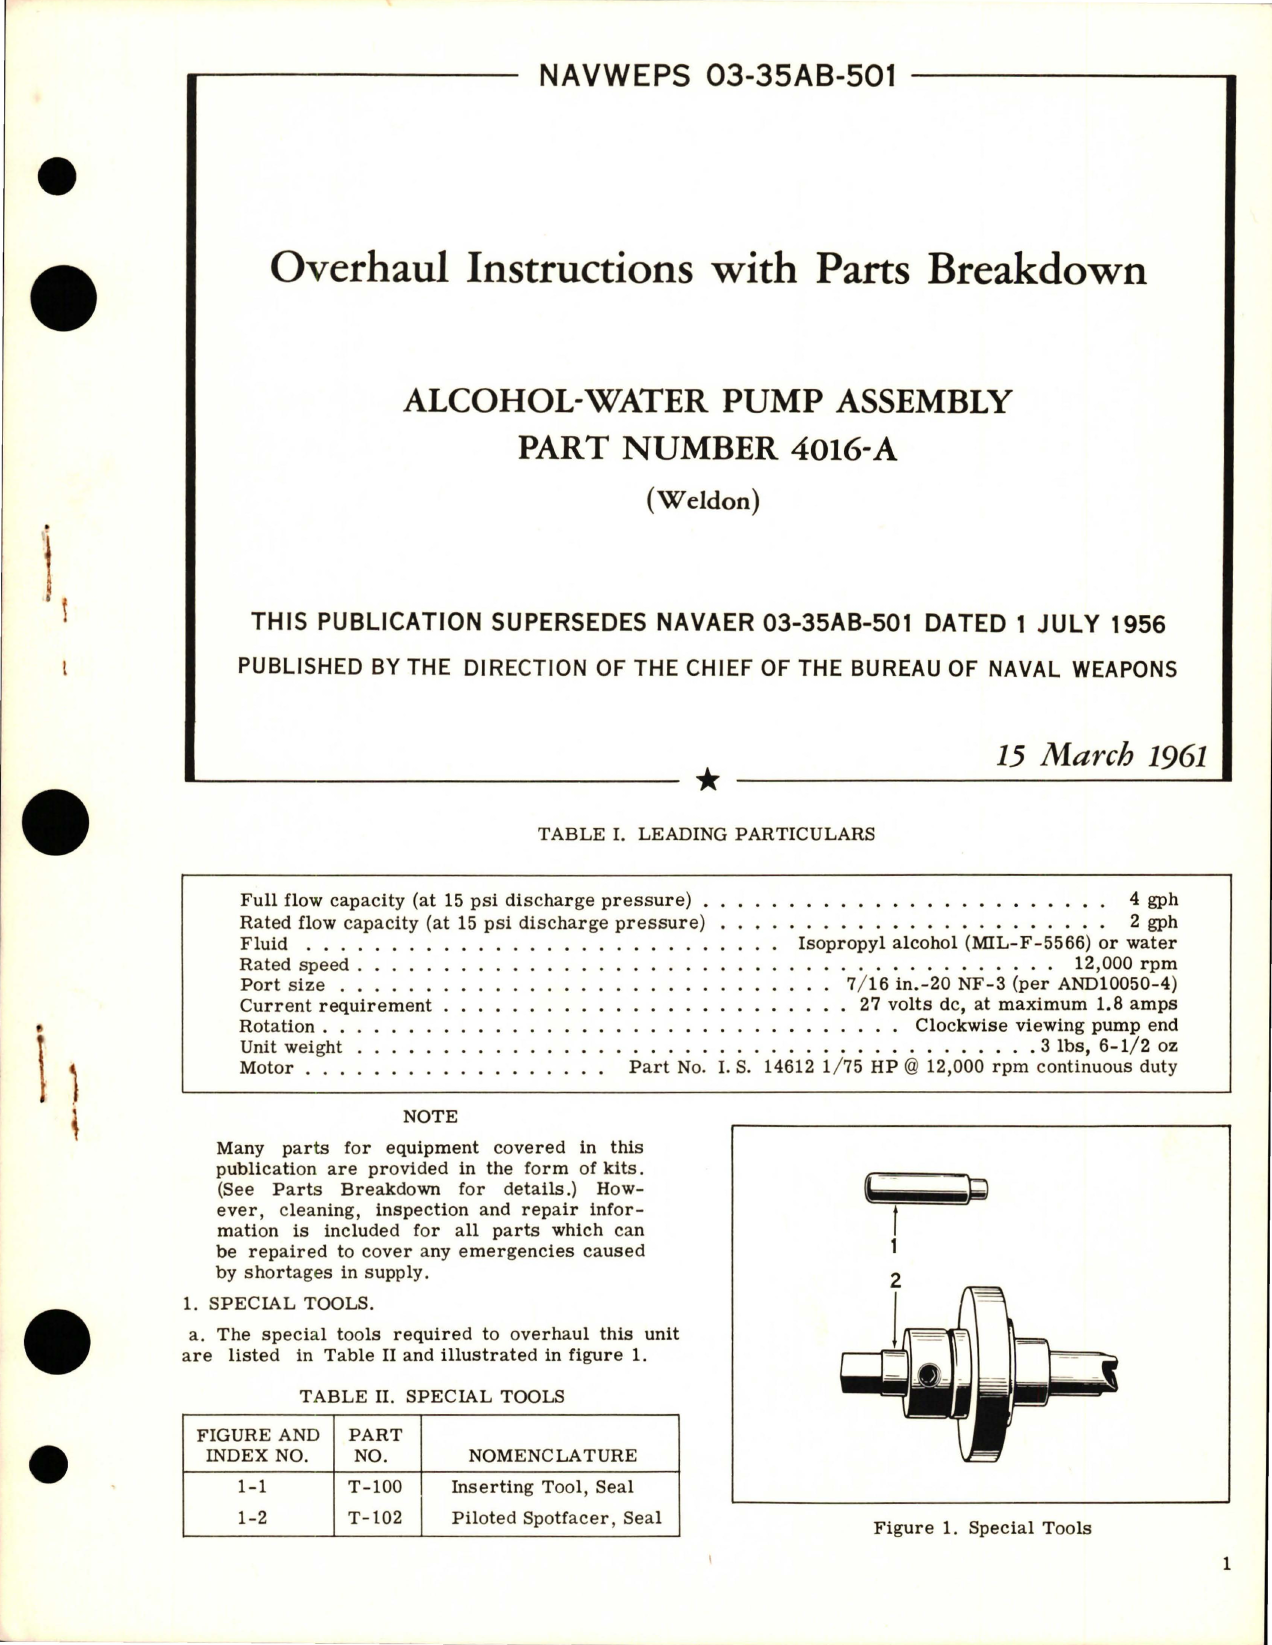 Sample page 1 from AirCorps Library document: Overhaul Instructions with Parts Breakdown for Alcohol-Water Pump Assembly - Part 4016-A